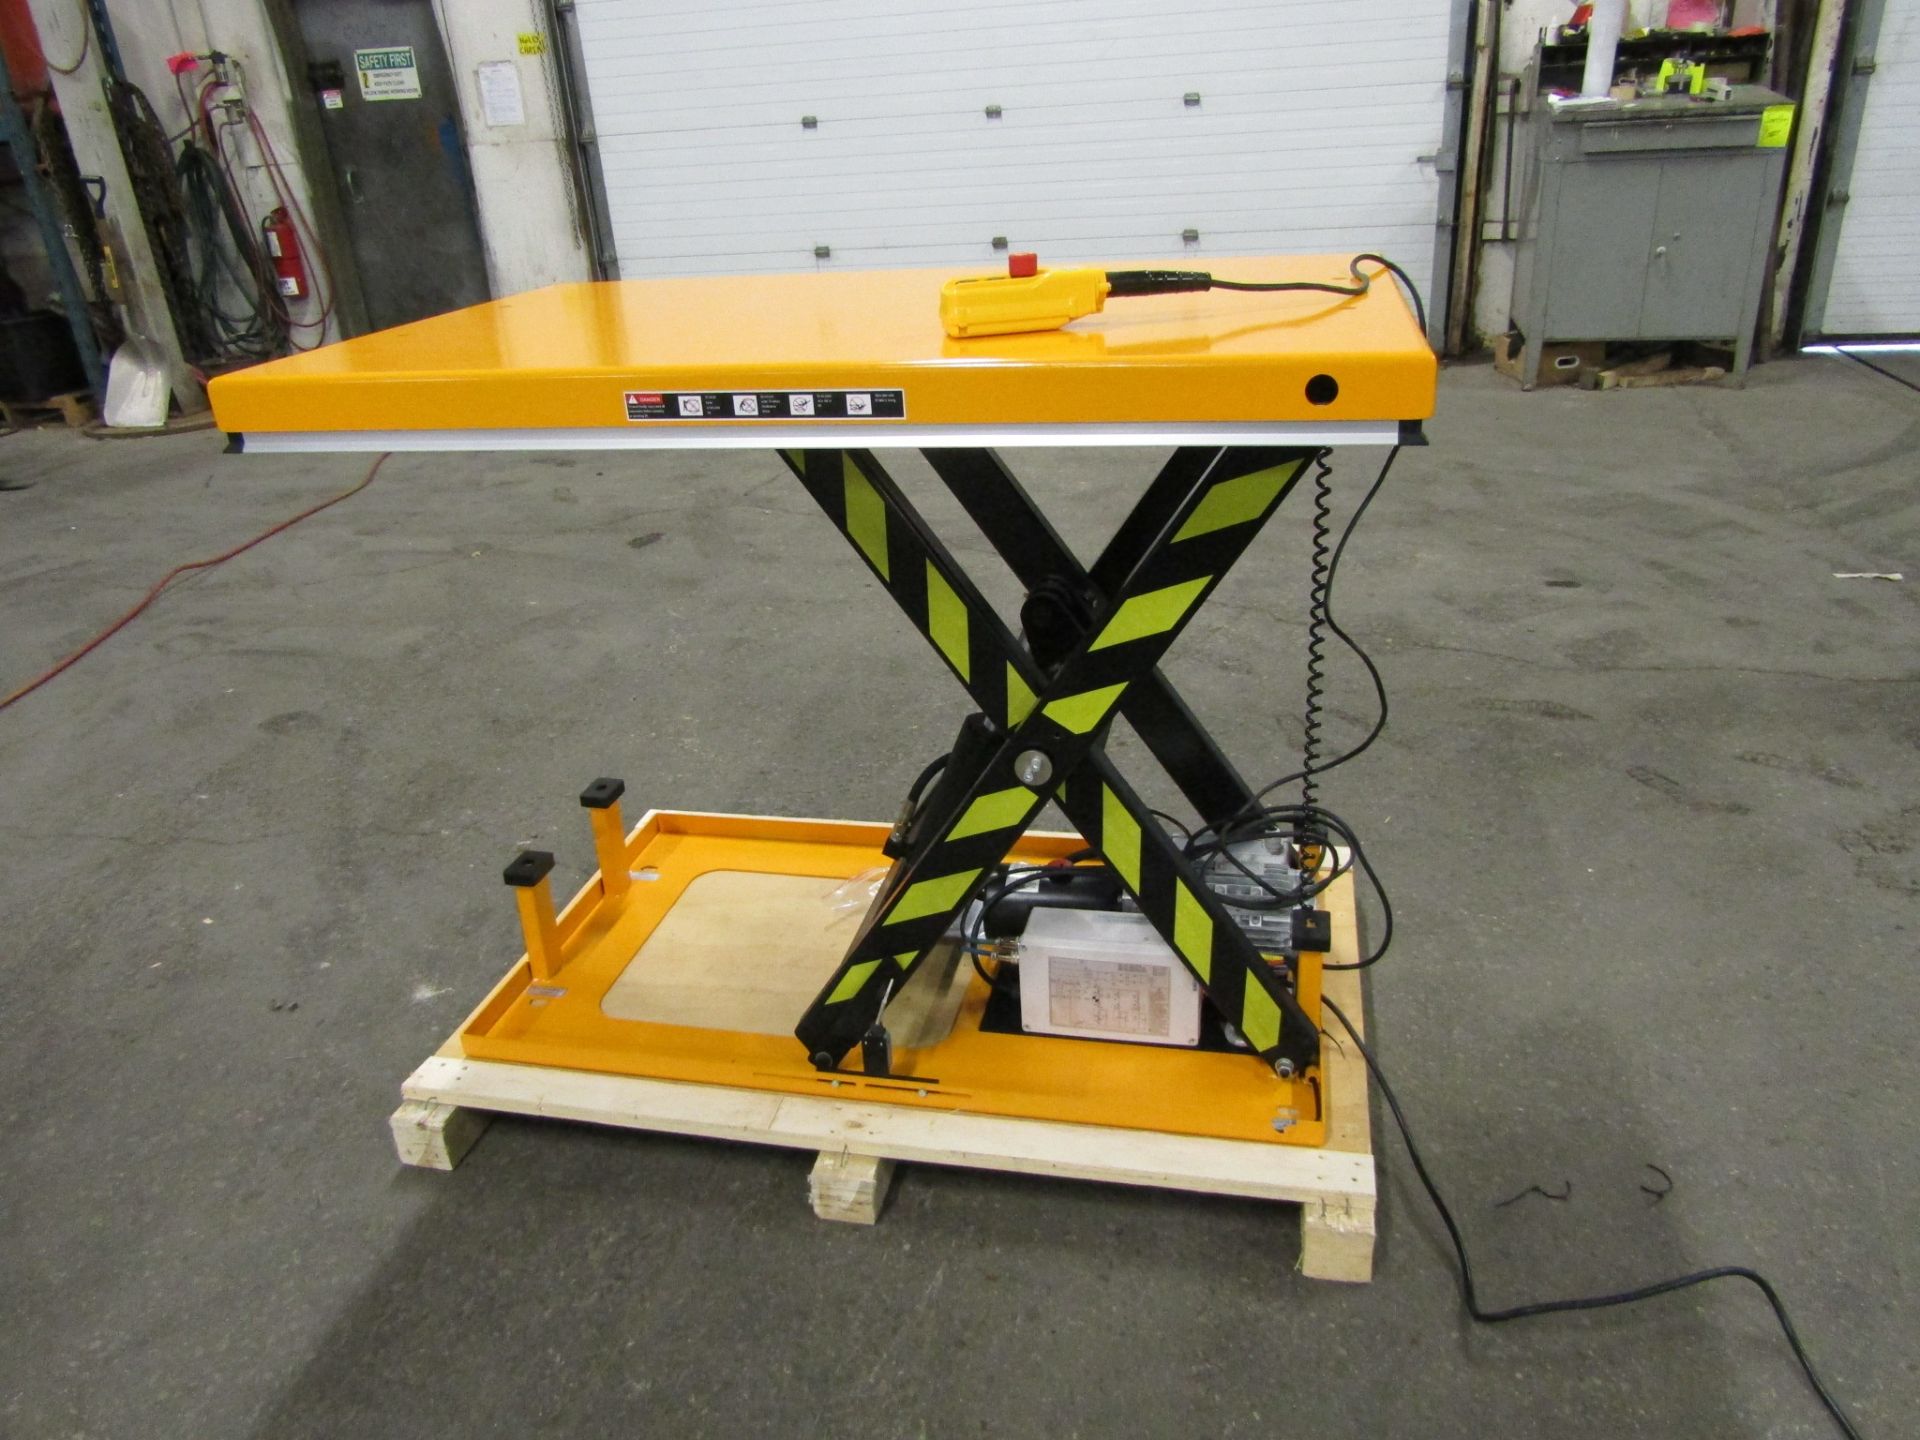 Olympic Hydraulic Lift Table 32" x 52" x 40" lift - 4000lbs capacity - UNUSED and MINT - 115V - Image 3 of 3